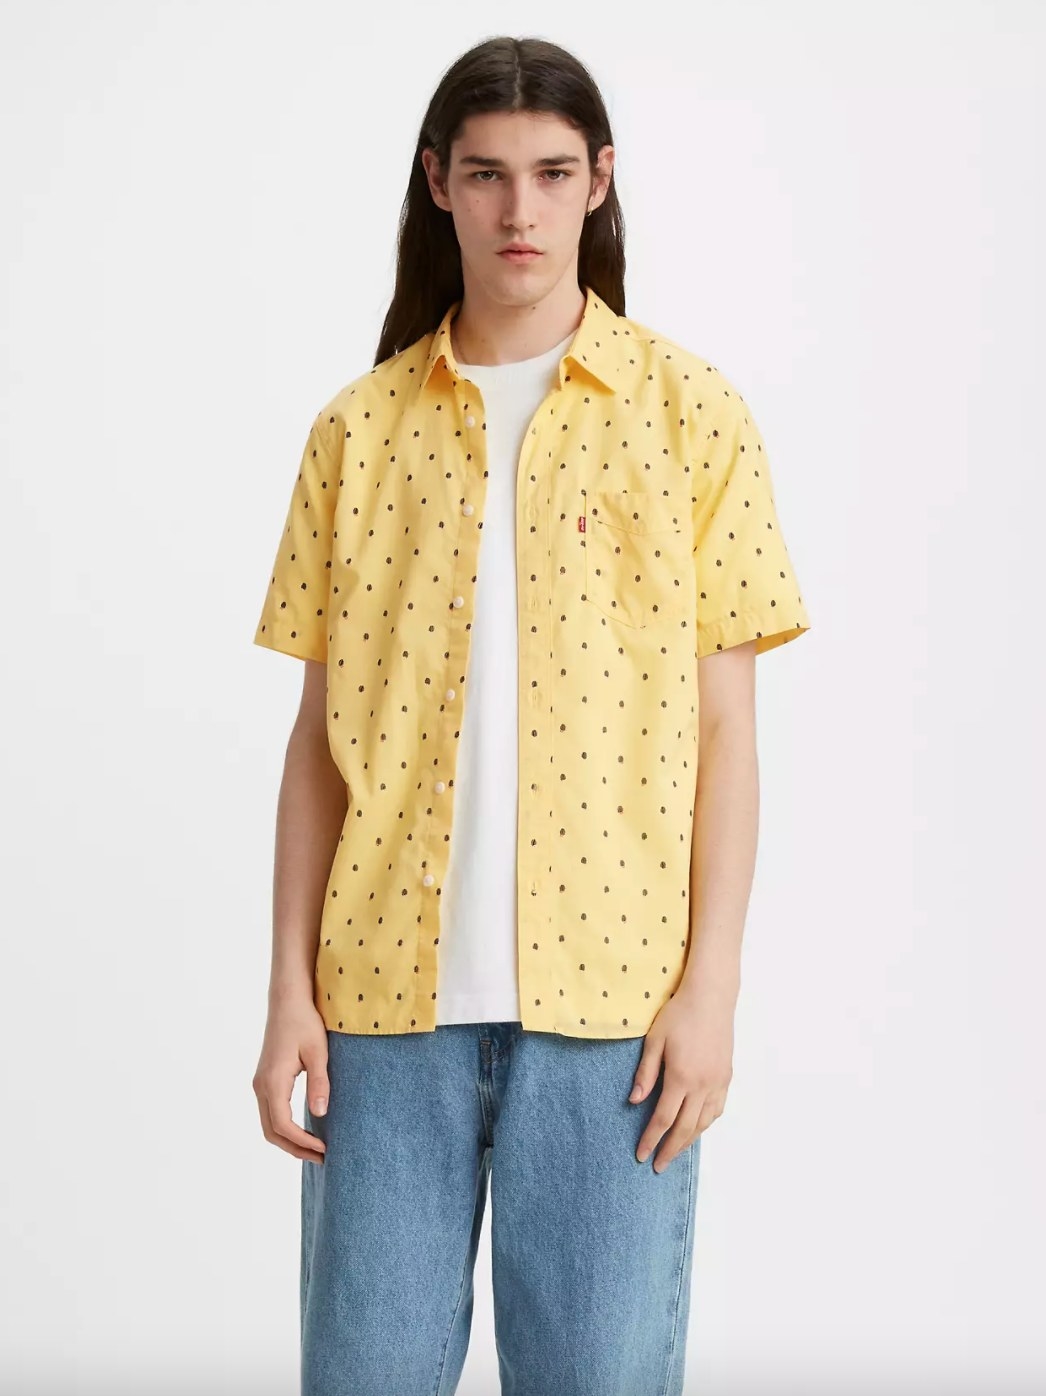 The sunset one pocket shirt in yellow